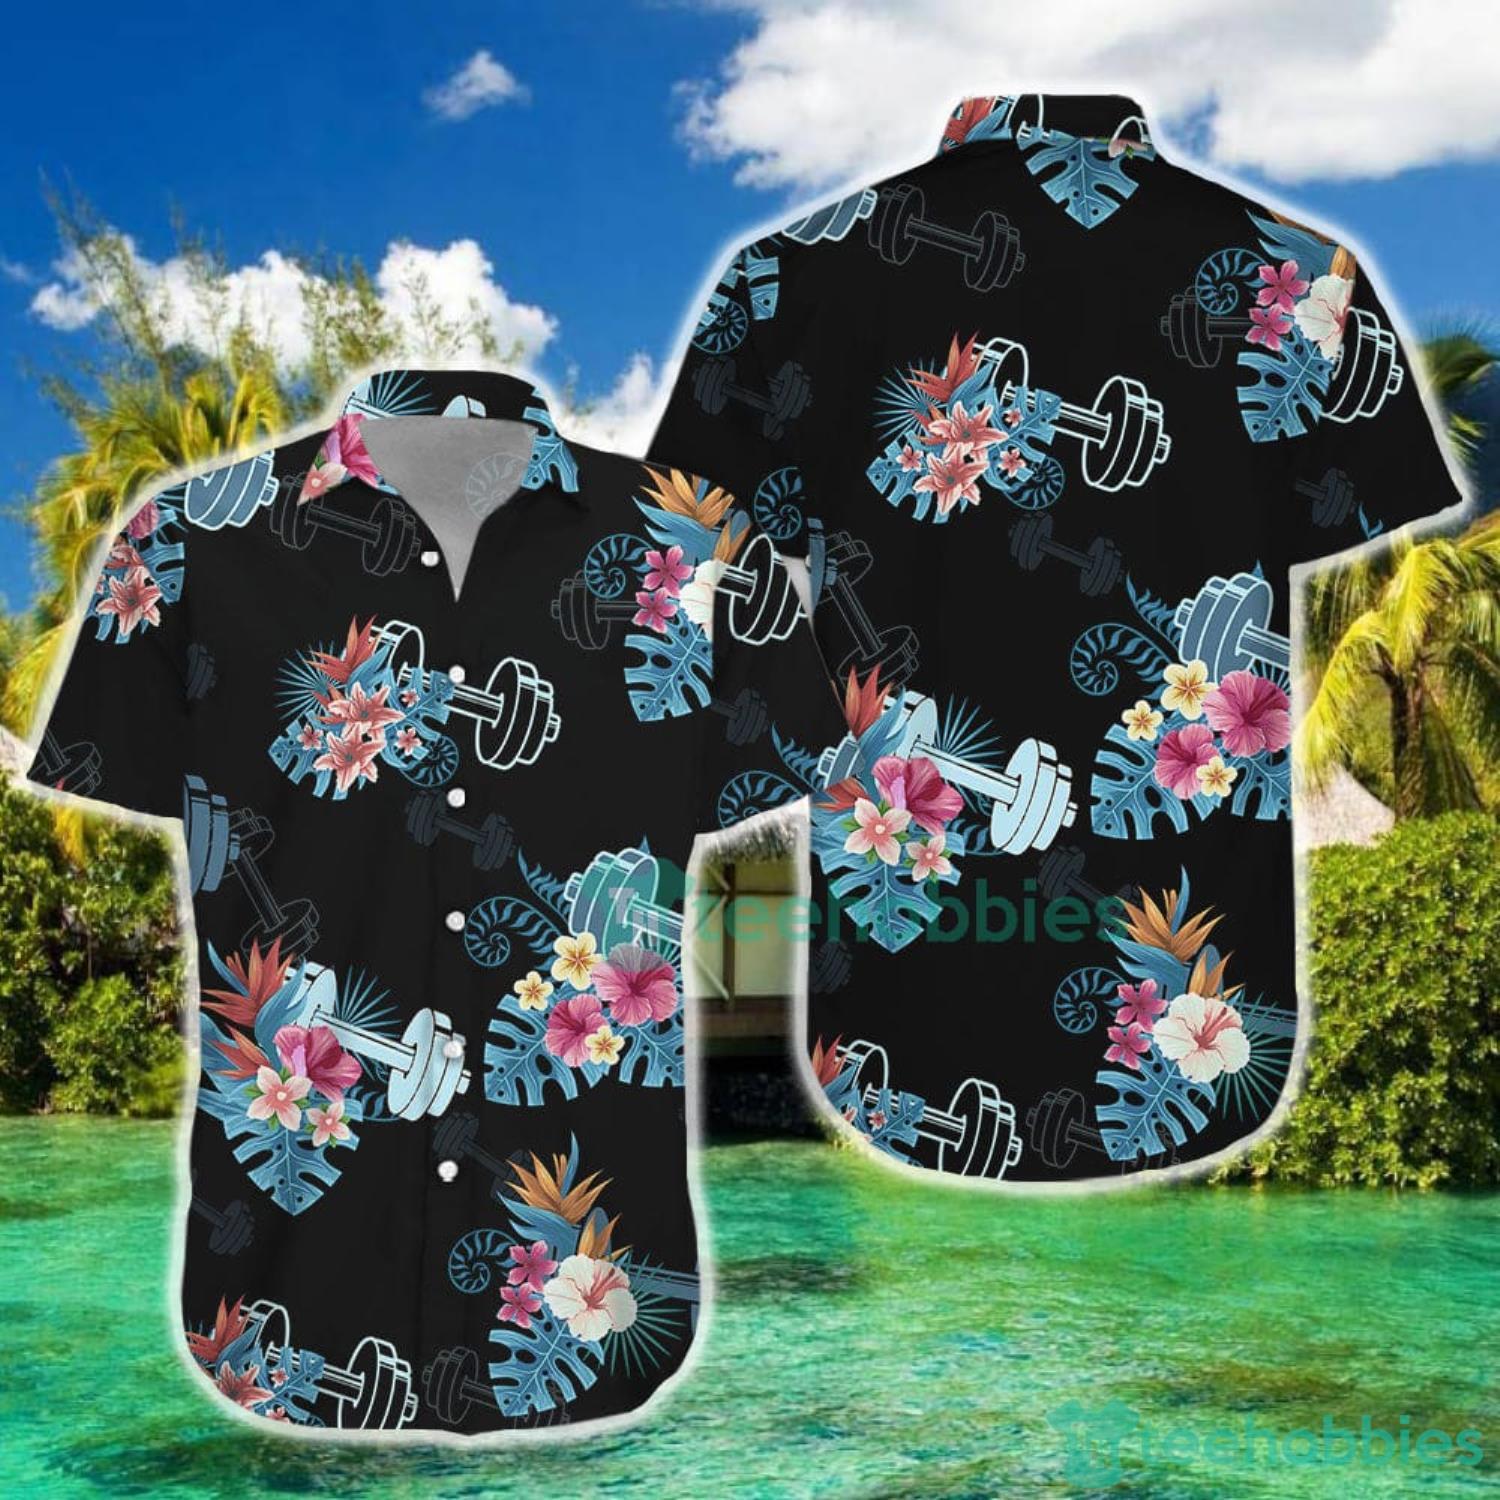 Weightlifting Shirt Weightlifting Tropical Pattern Hawaiian Shirt And Short  Gift Ideas For Weightlifters